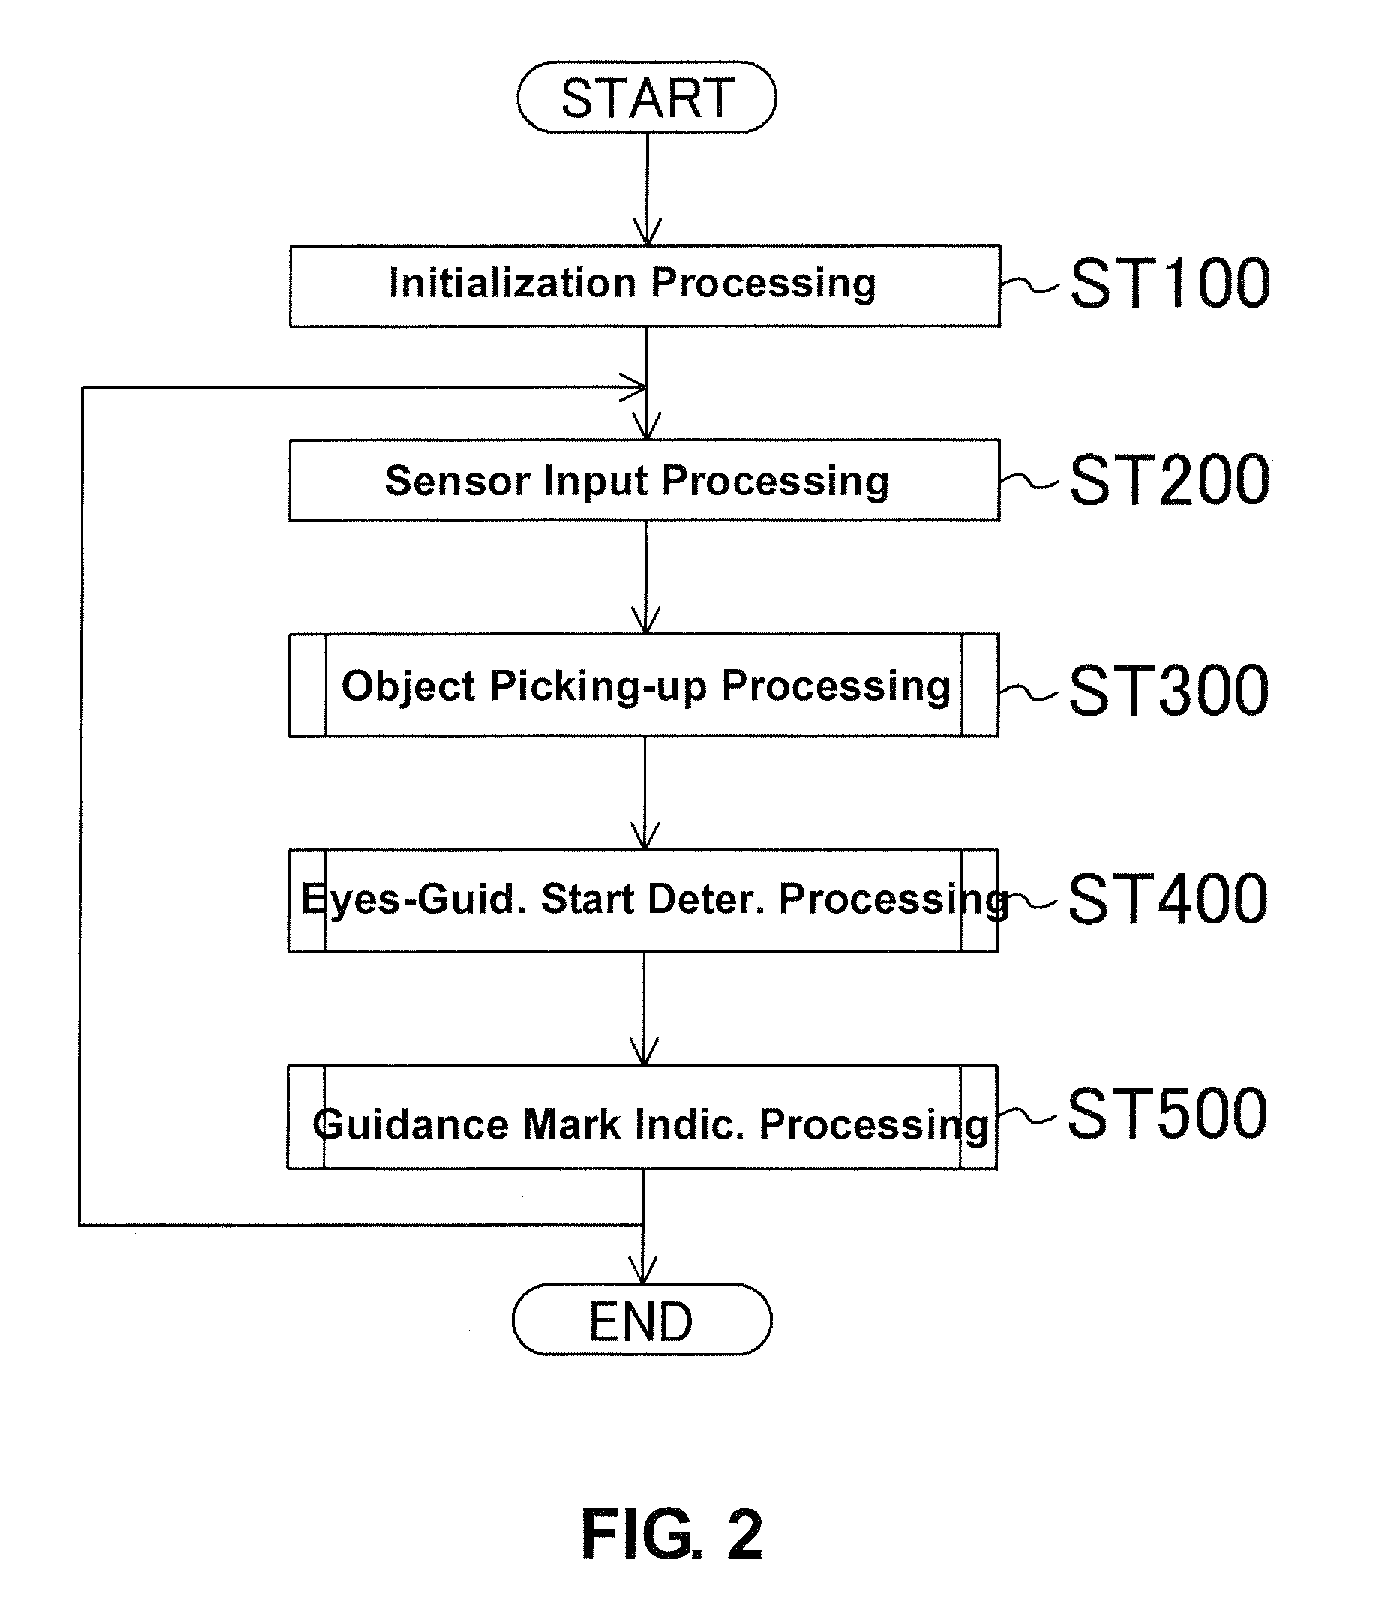 Driving assist device for vehicle